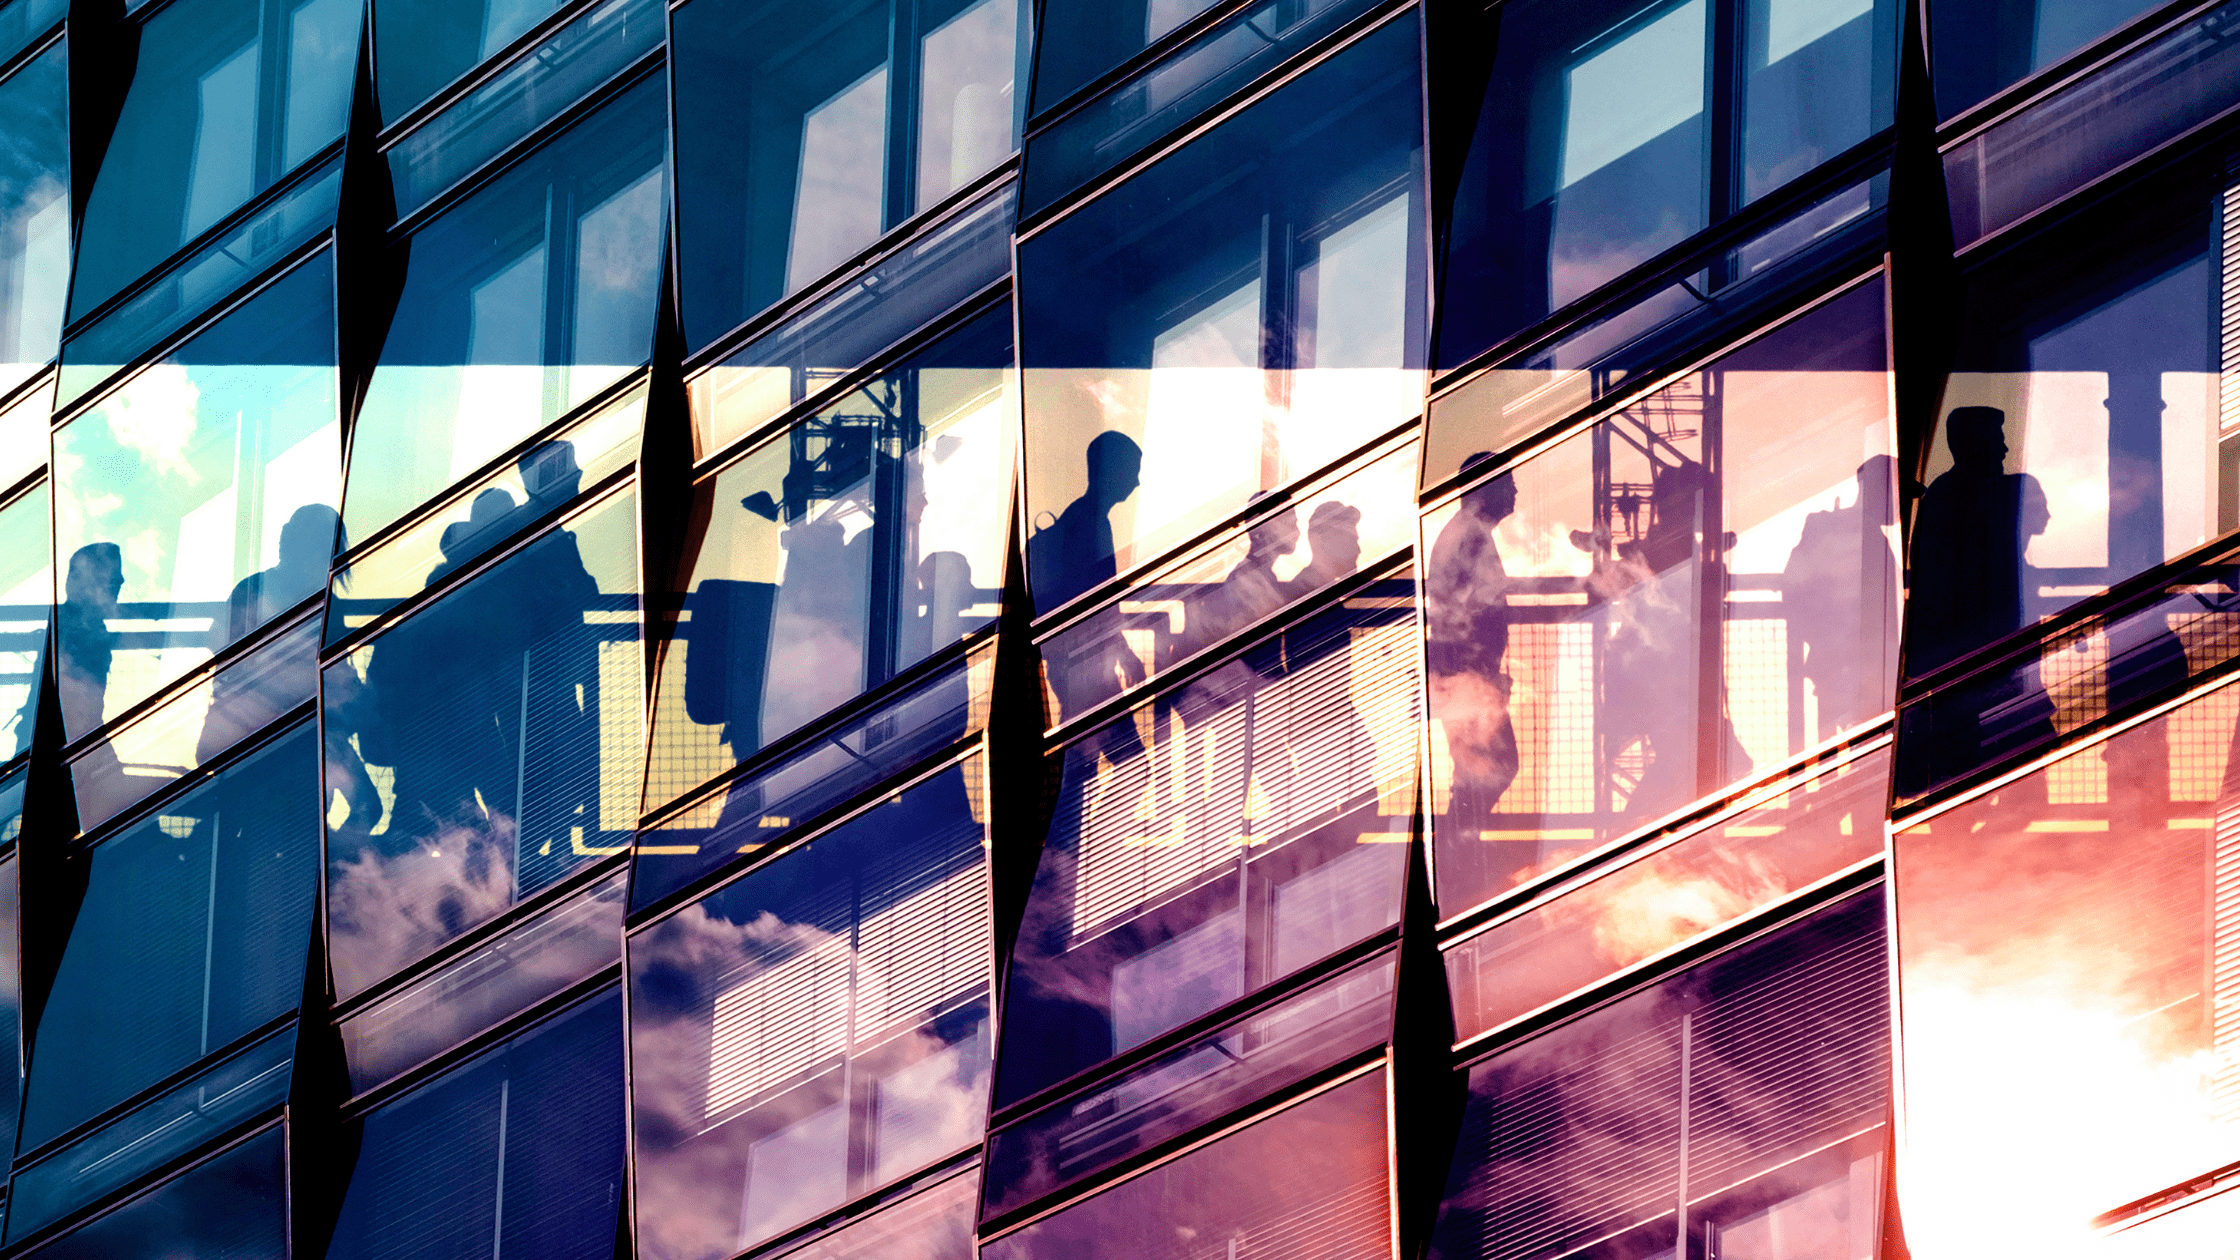 Abstract image of a building facade with people inside walking on a bridge walkway